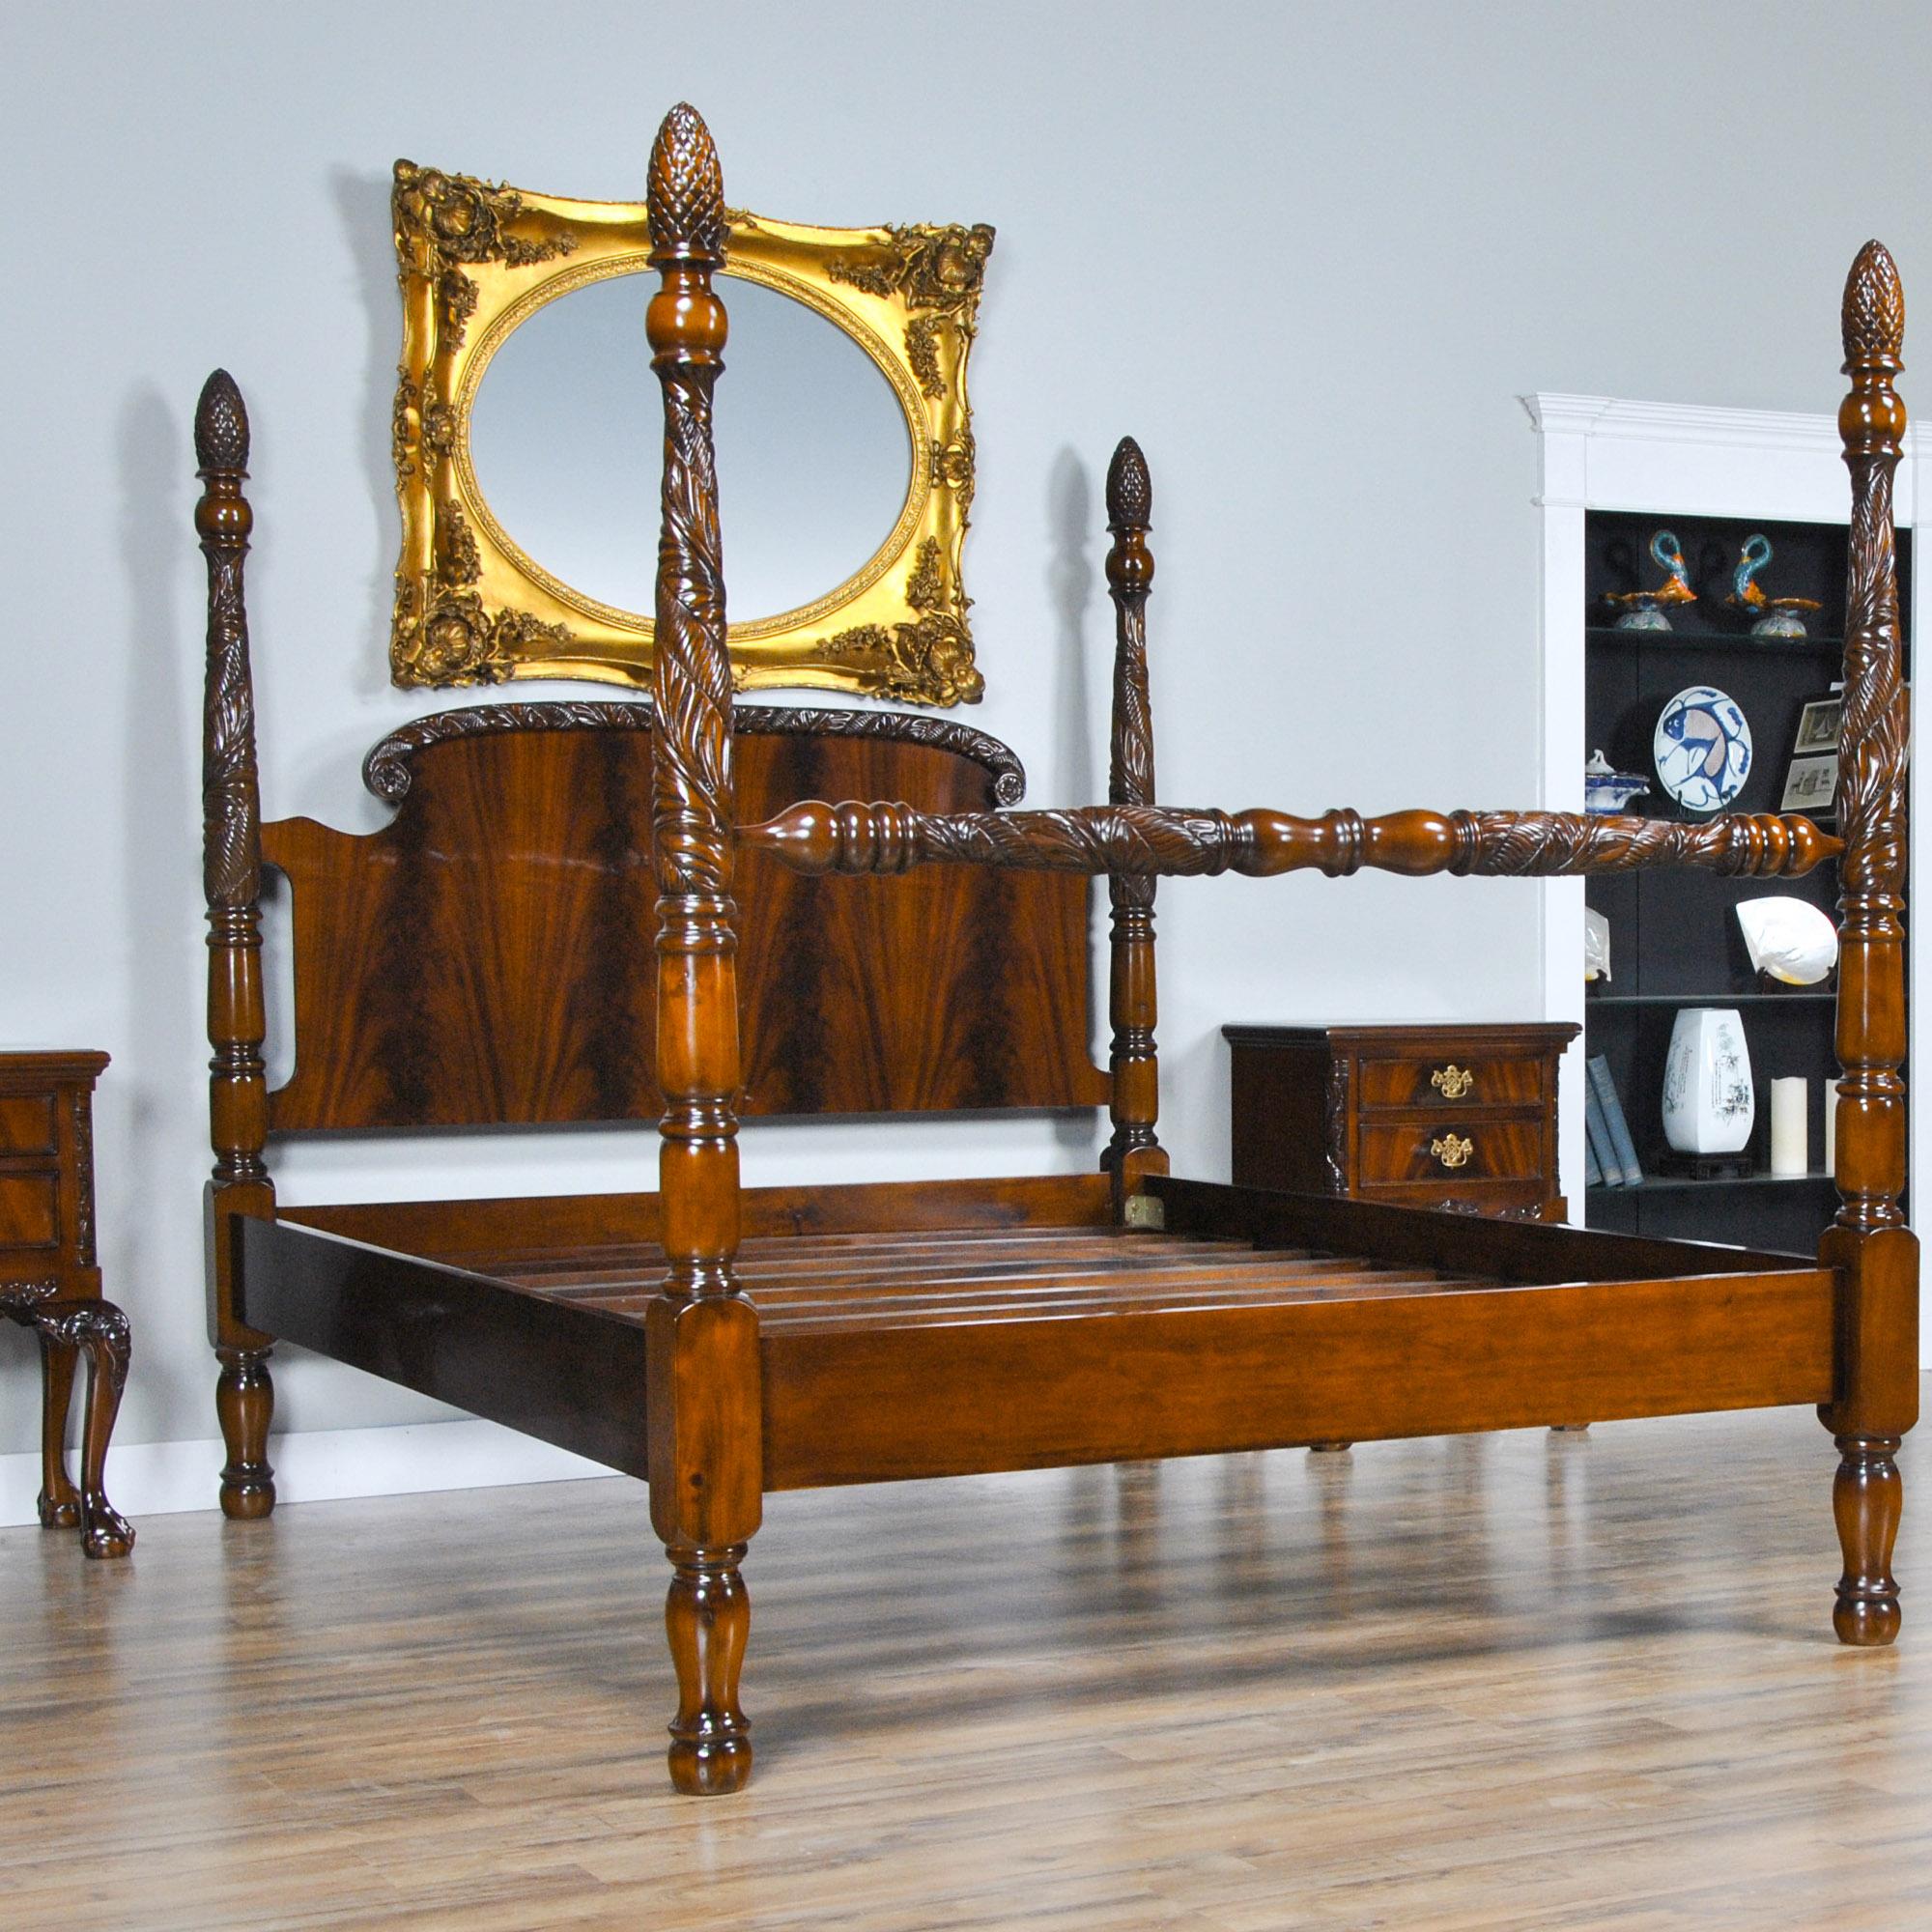 A Mahogany Queen Size Poster Bed with Hand Carved Pineapple Topped Posts. A Solid Mahogany Frame and the finest mahogany veneered headboard panel combine together to create a high quality, beautiful and elegant bed. This piece compliments many of